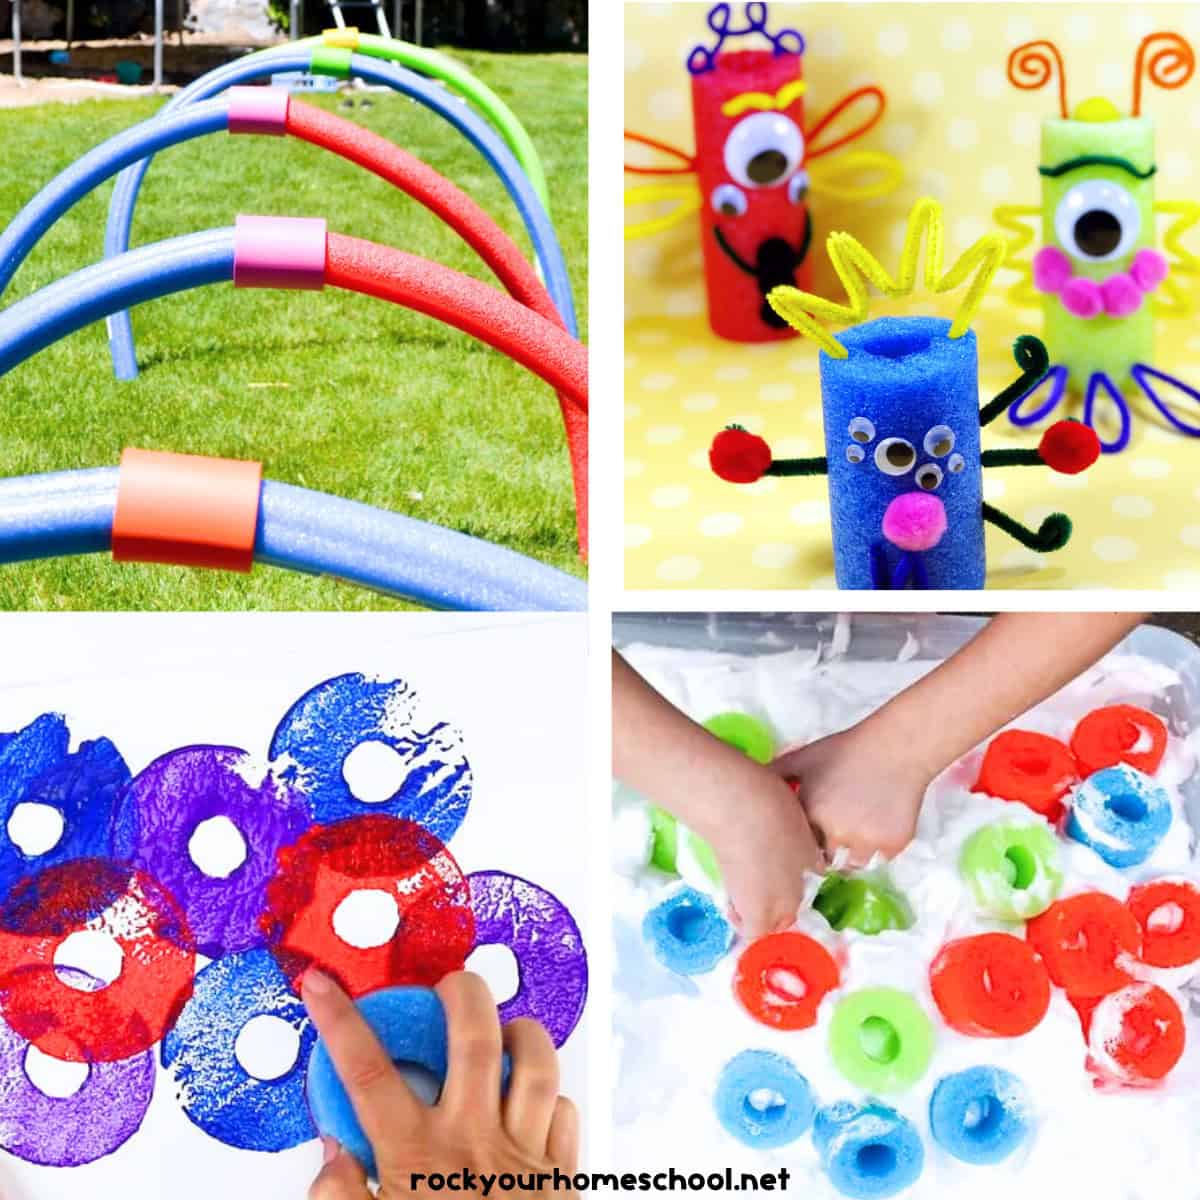 Pool Noodle Activities and Crafts for Easy DIY Frugal Fun